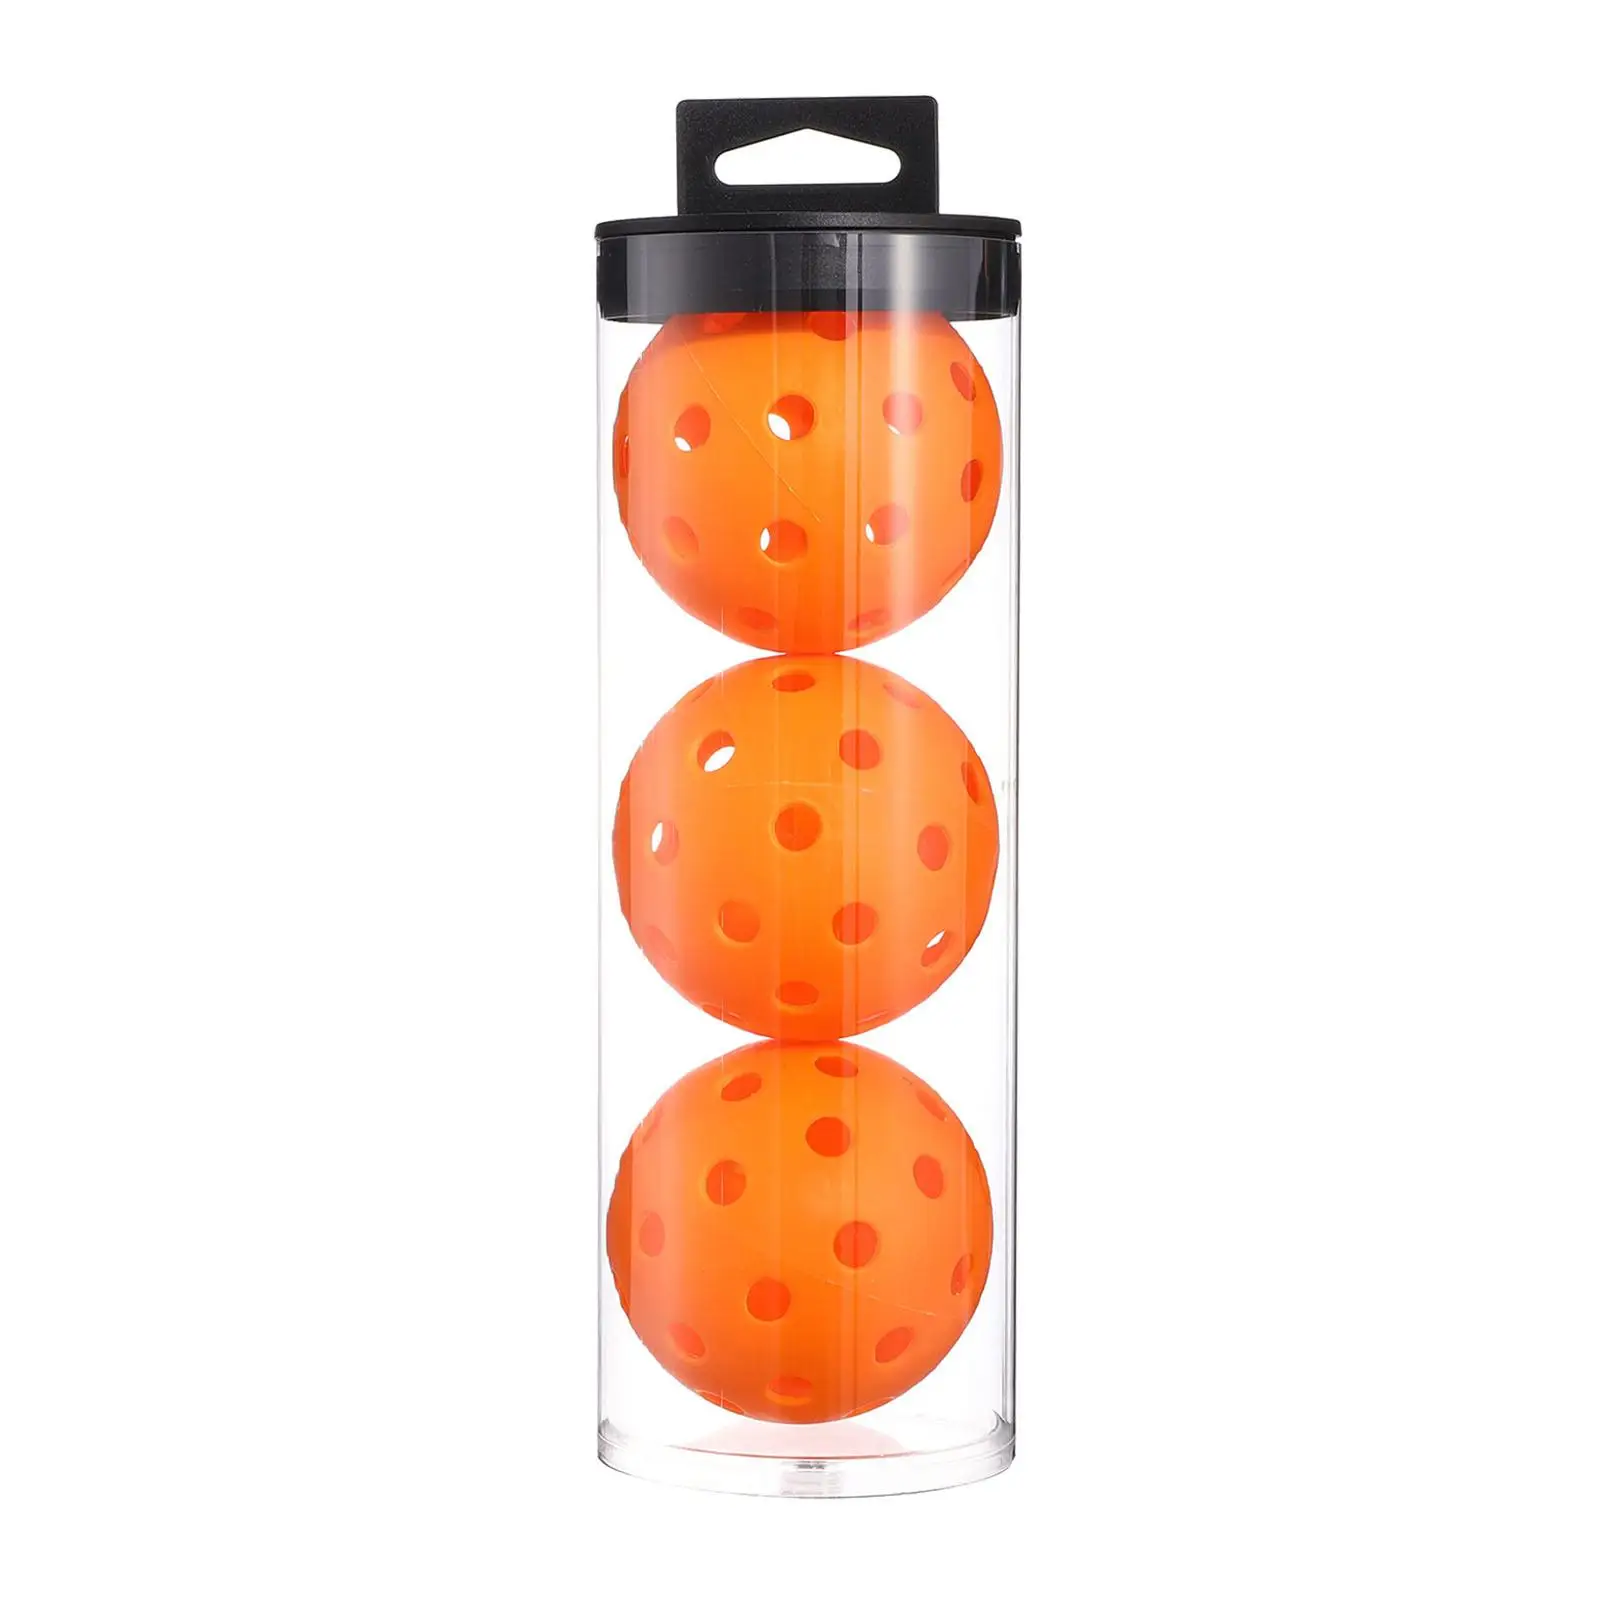 3x Pickleball Ball Practice Toy Ball for Outdoor Indoor Practice Training